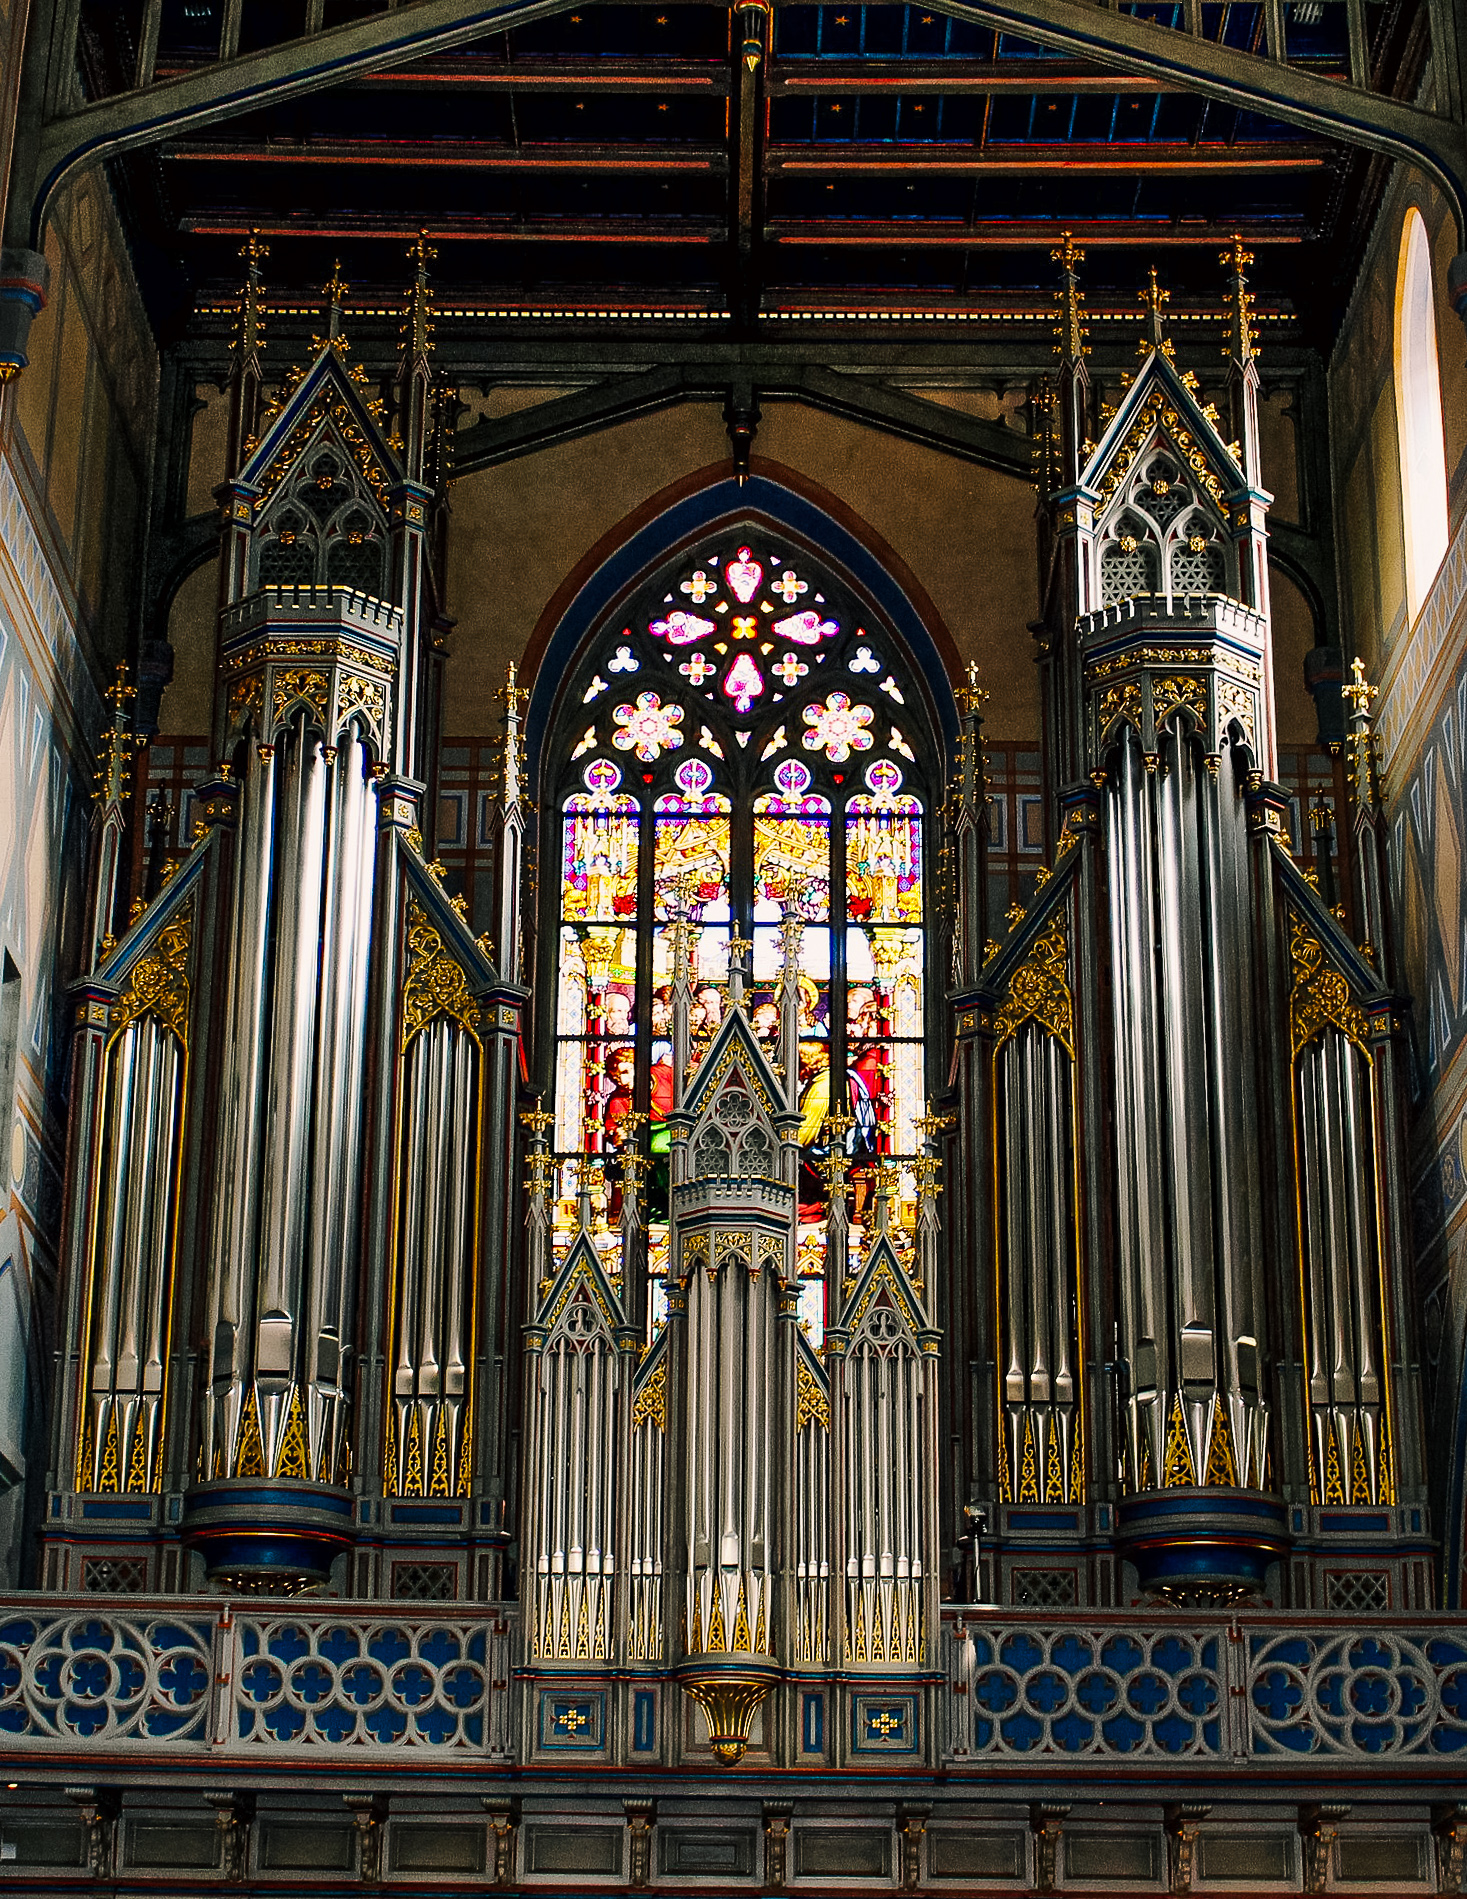 picture of the grand organ and stained glass windows inside St. Lawrence church.